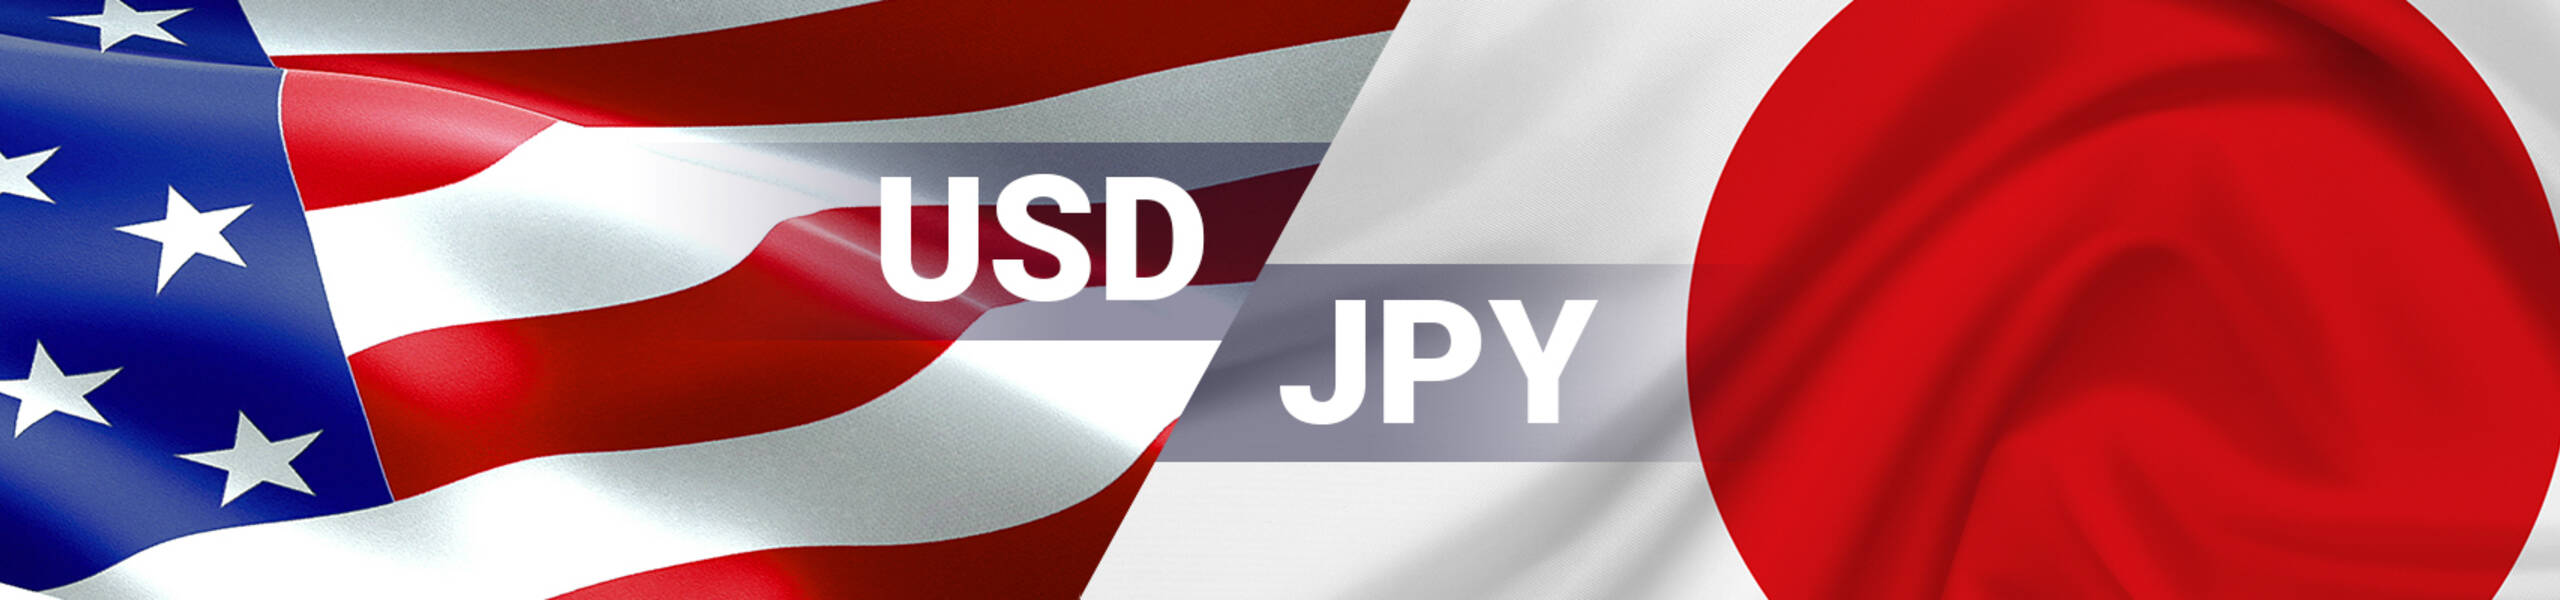 USD/JPY Dailyレポート 2018/02/23